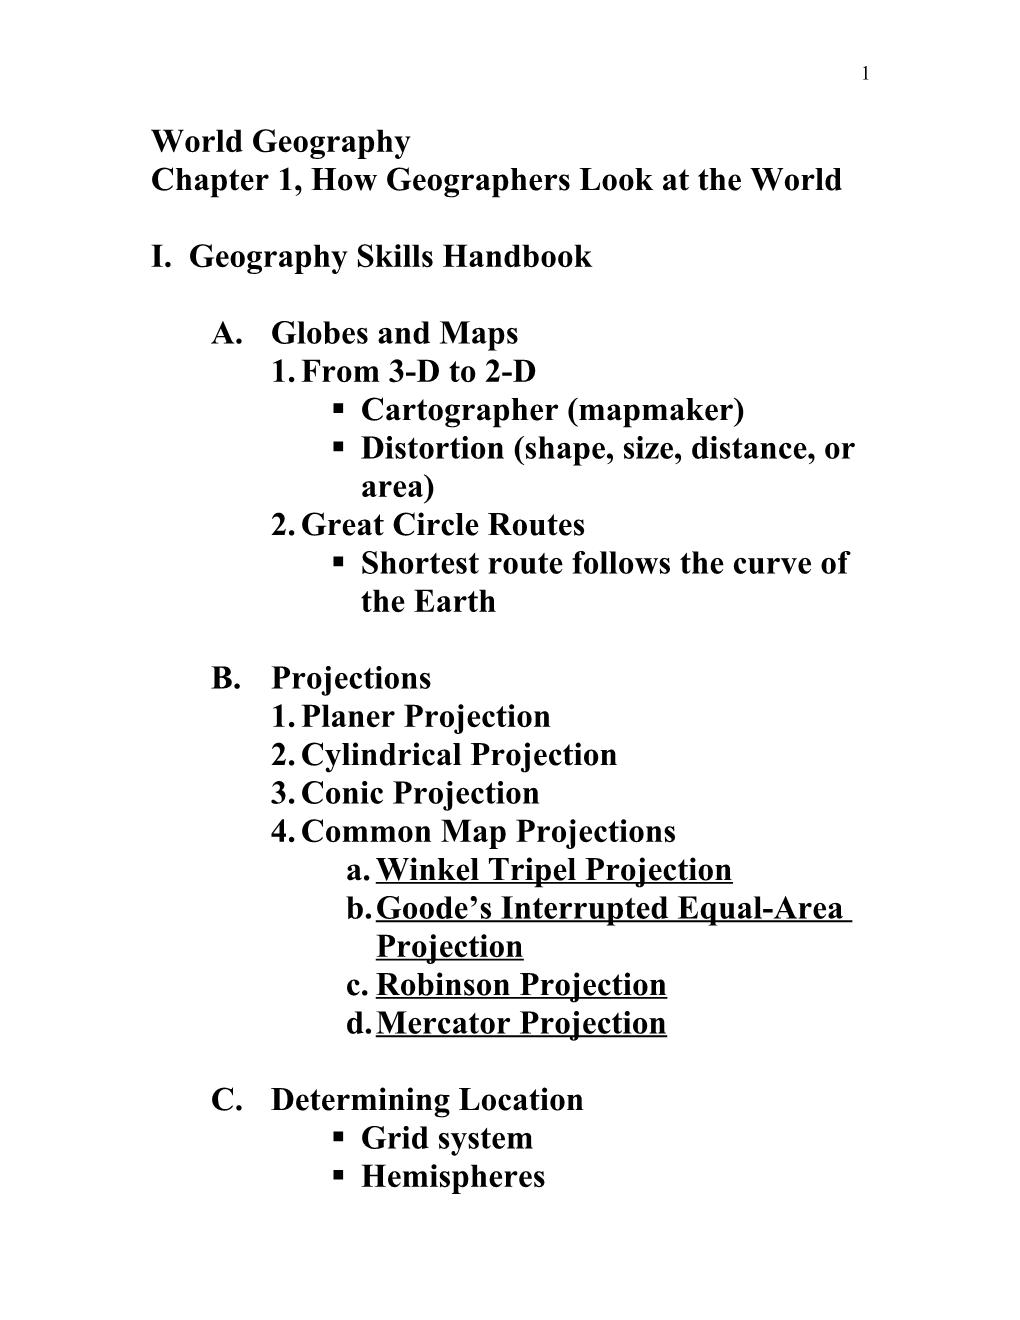 Chapter 1, How Geographers Look at the World